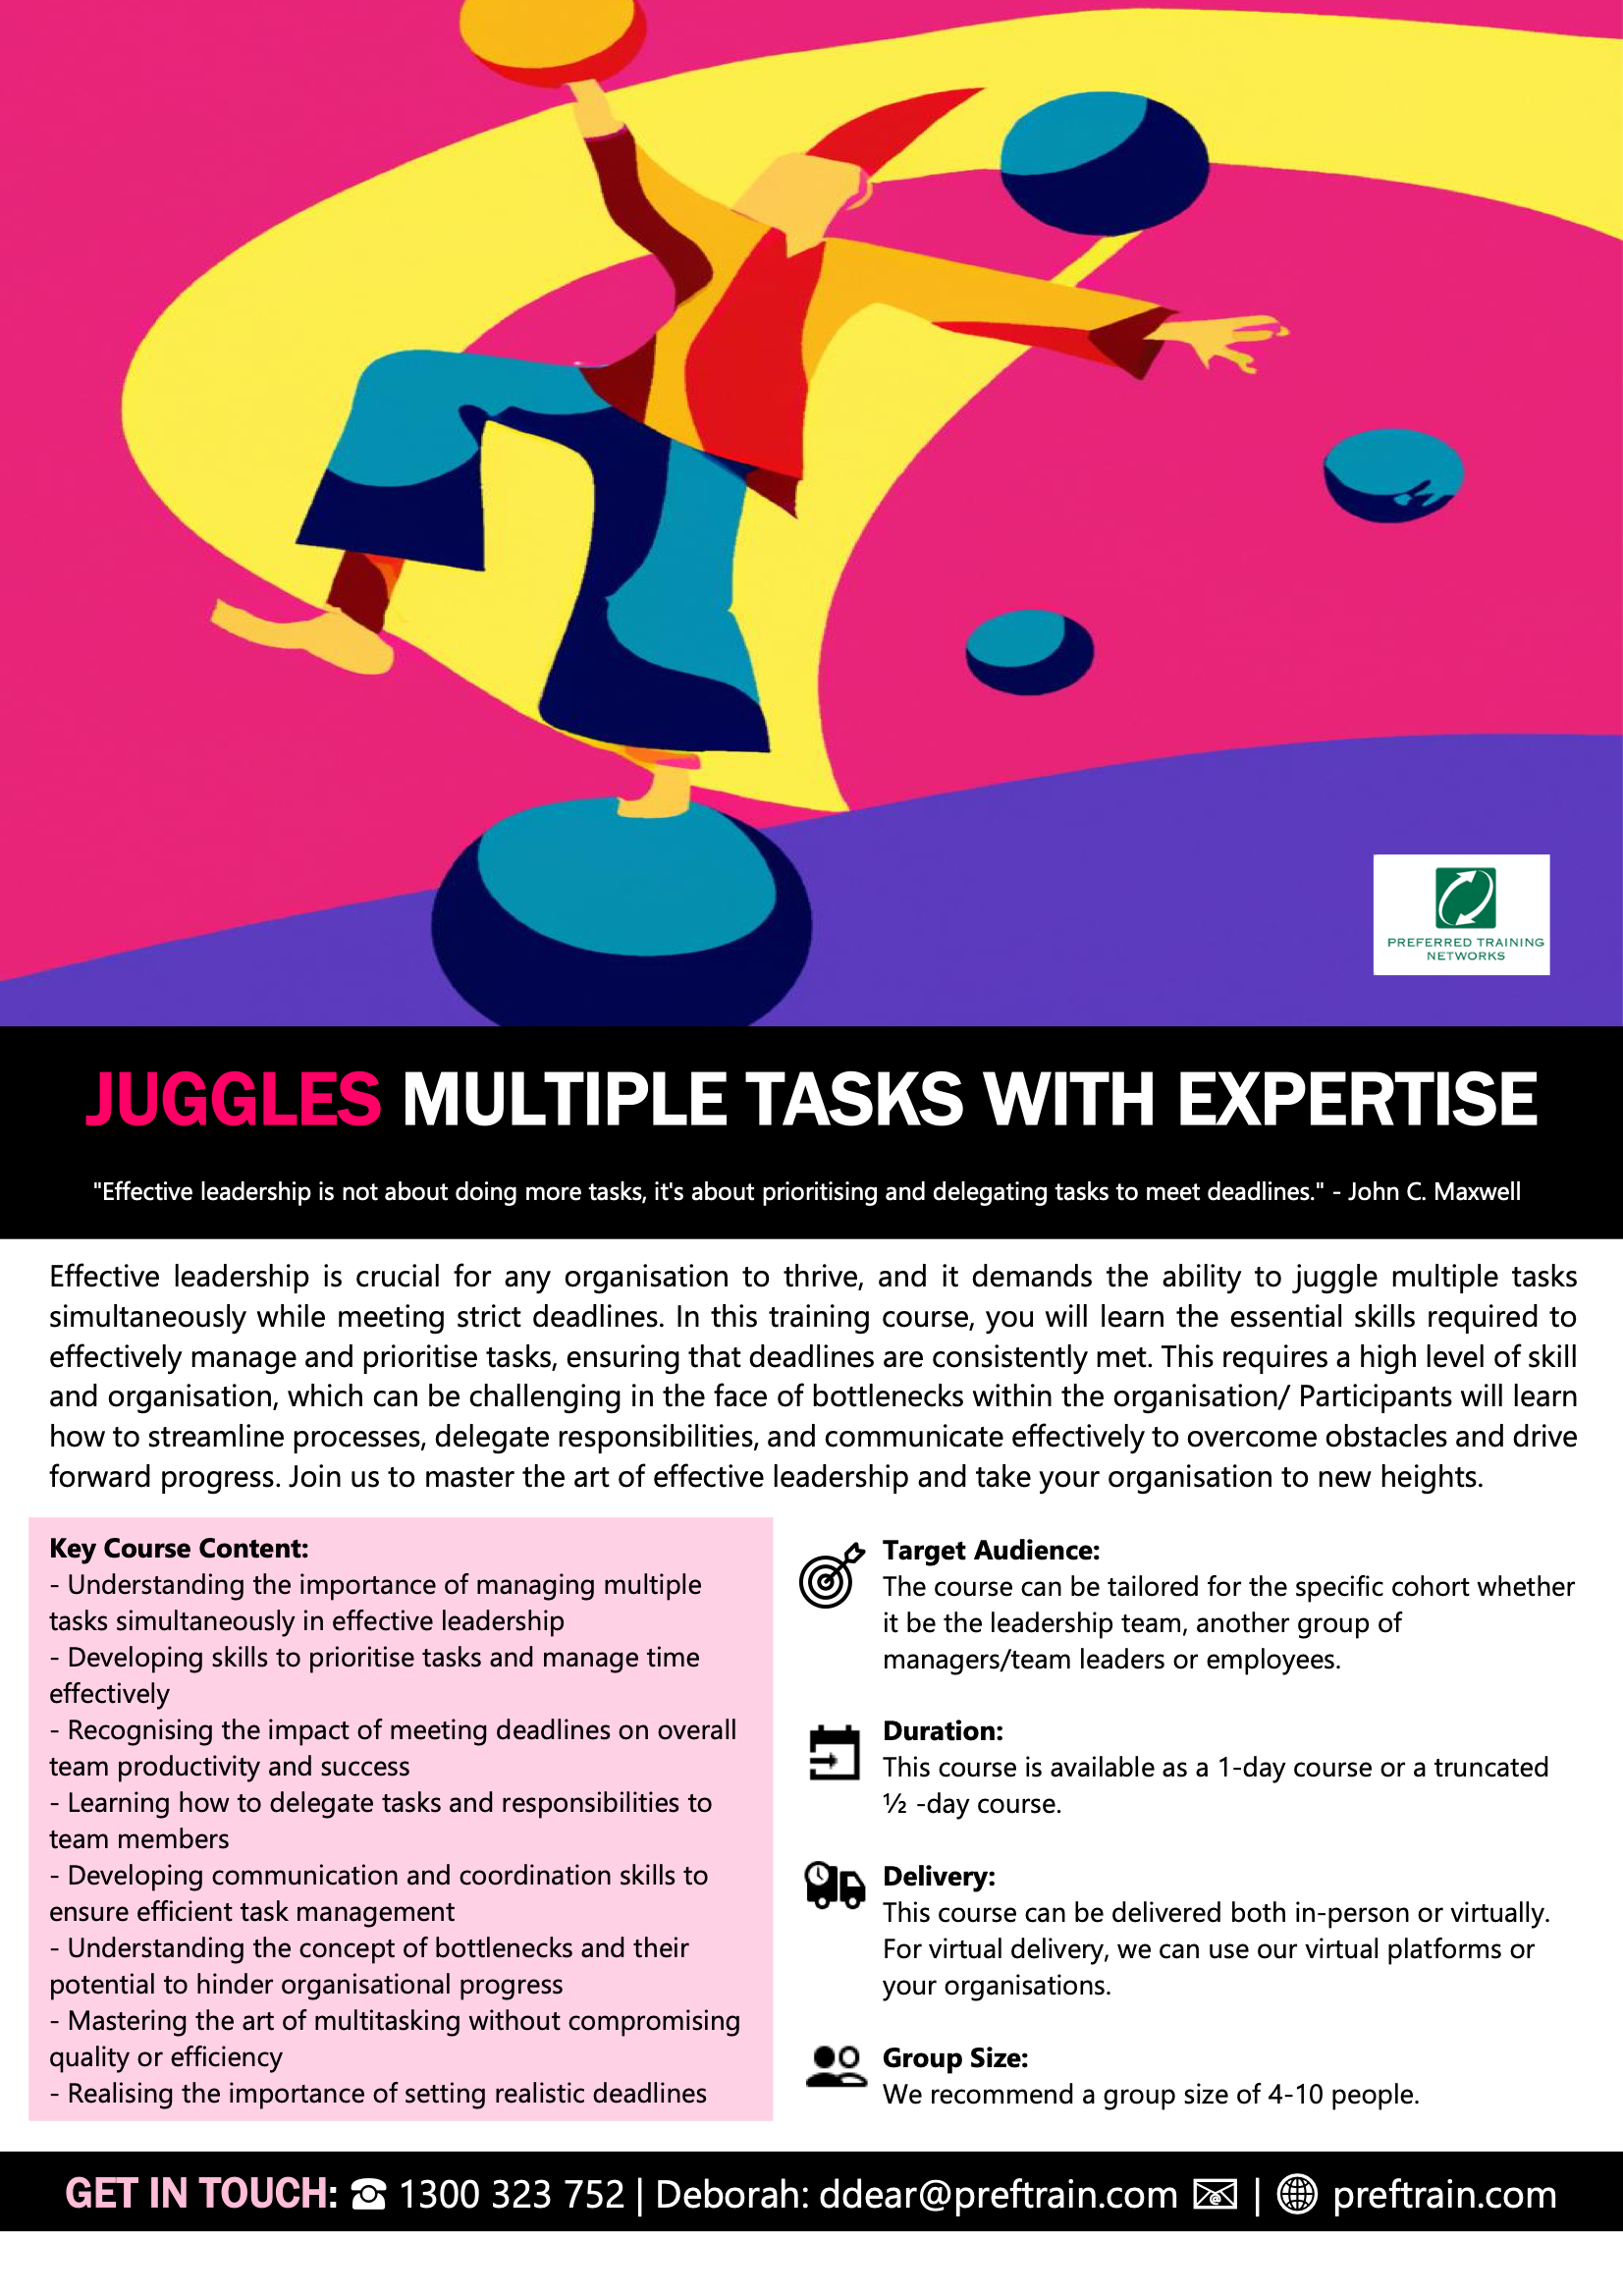 Juggles Multiple Tasks with Expertise